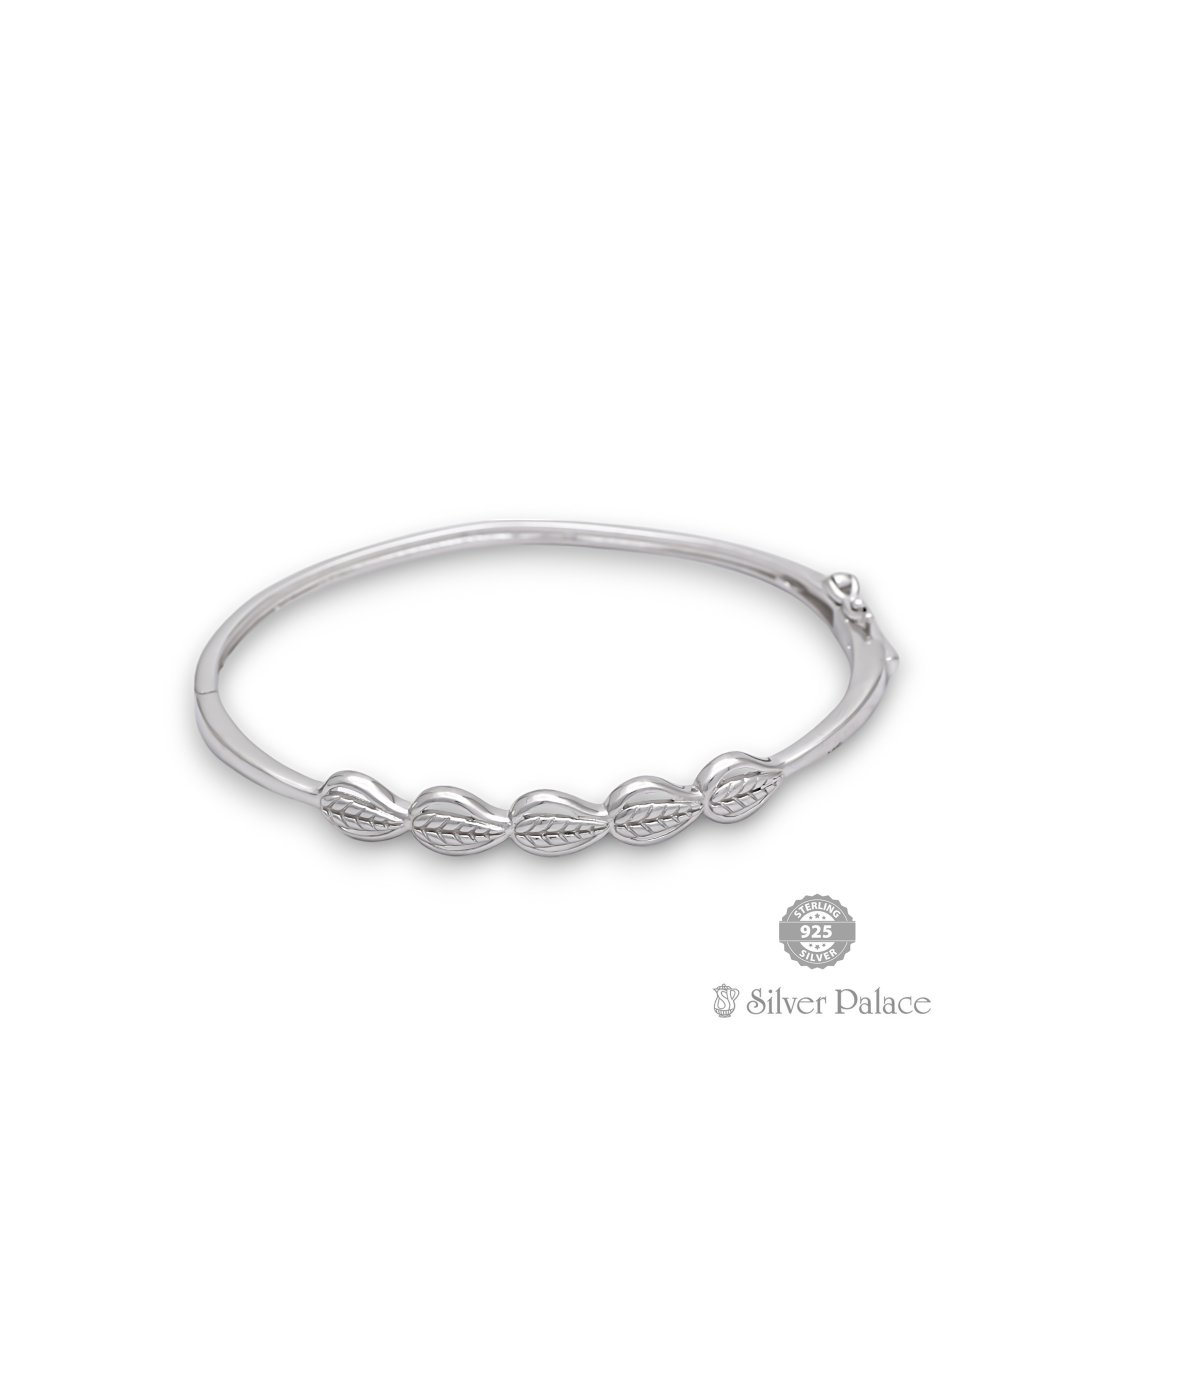 92.5 STERLING SILVER  Adjustable Open Kada for girls and women